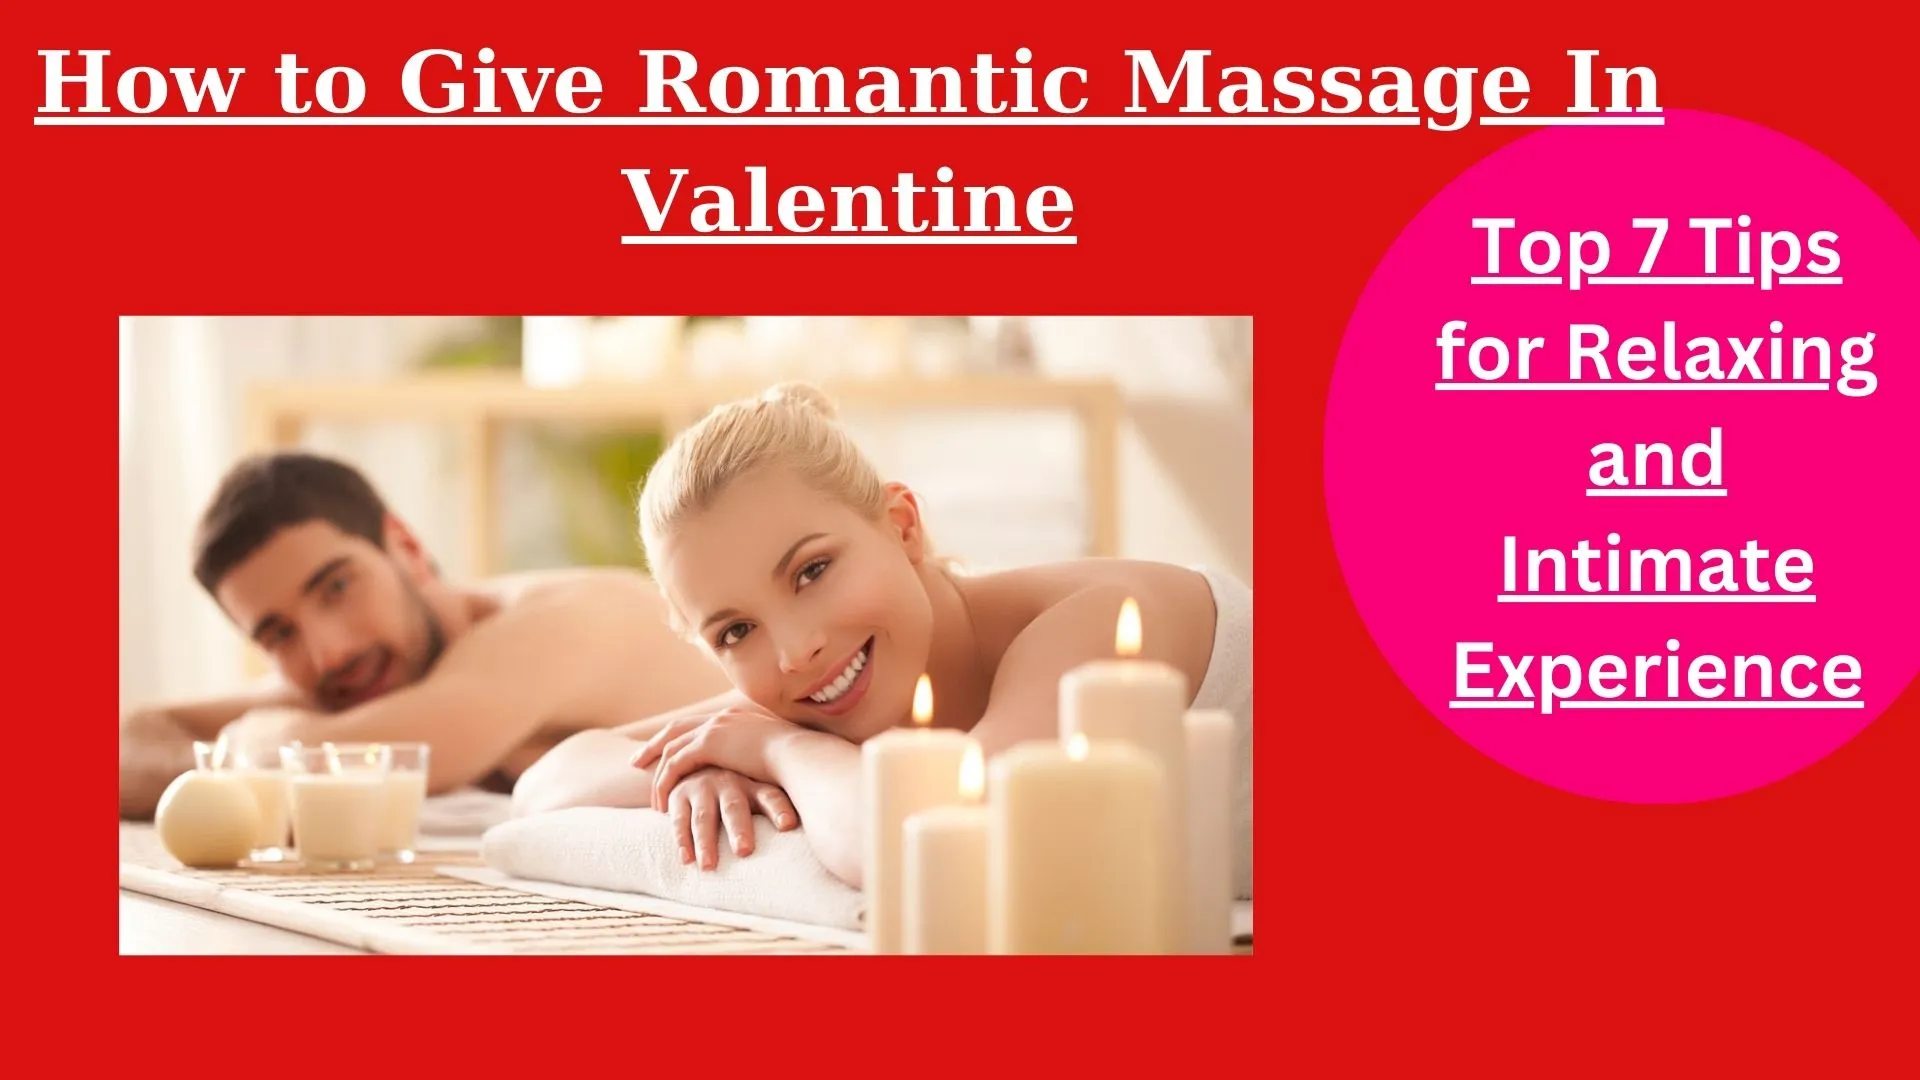 How to Give Romantic Massage In Valentine : Top 7 Tips for Relaxing and Intimate Experience